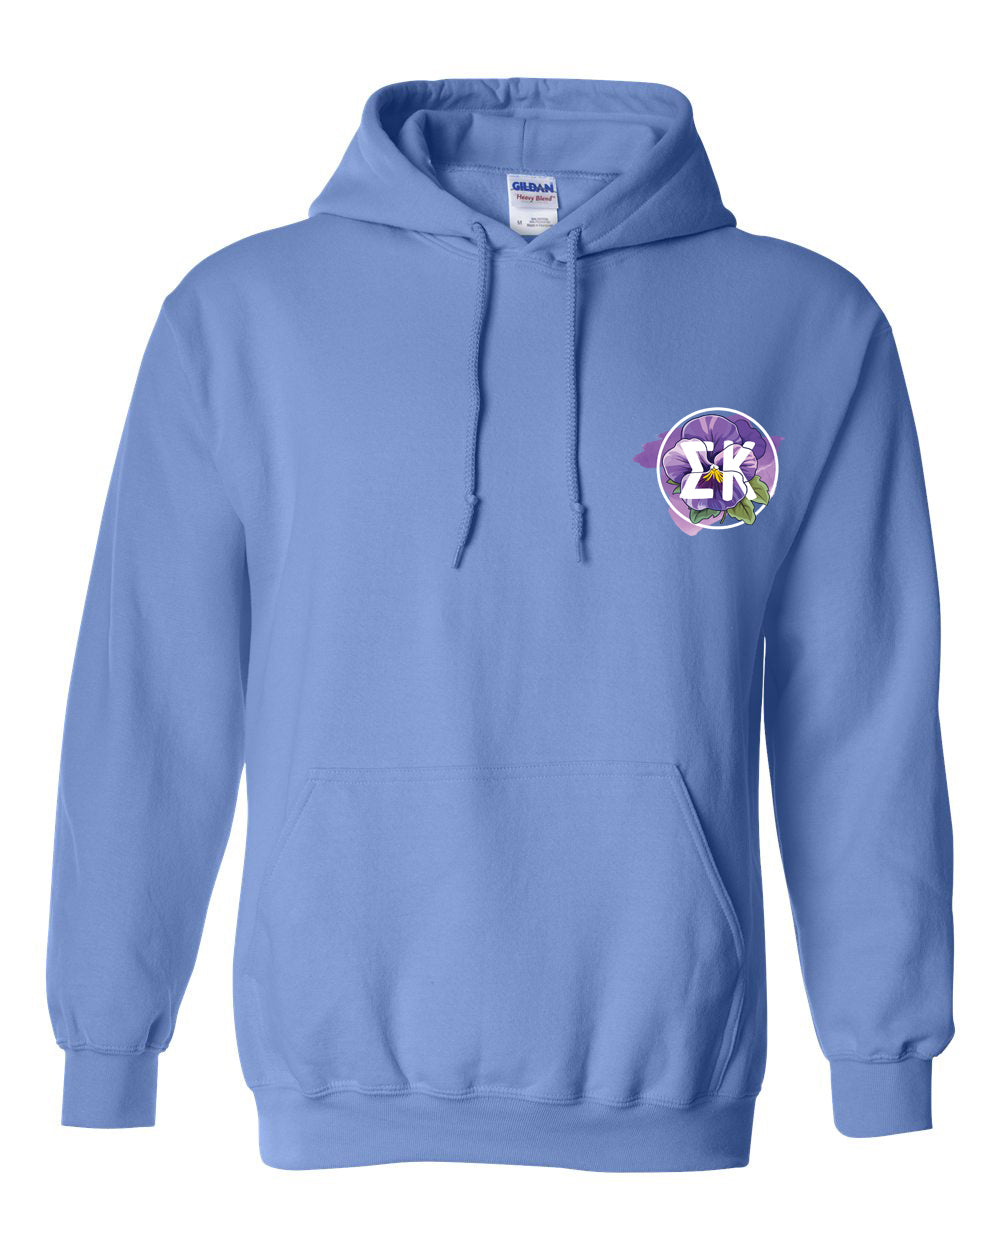 a light blue hoodie with the letter k in the center